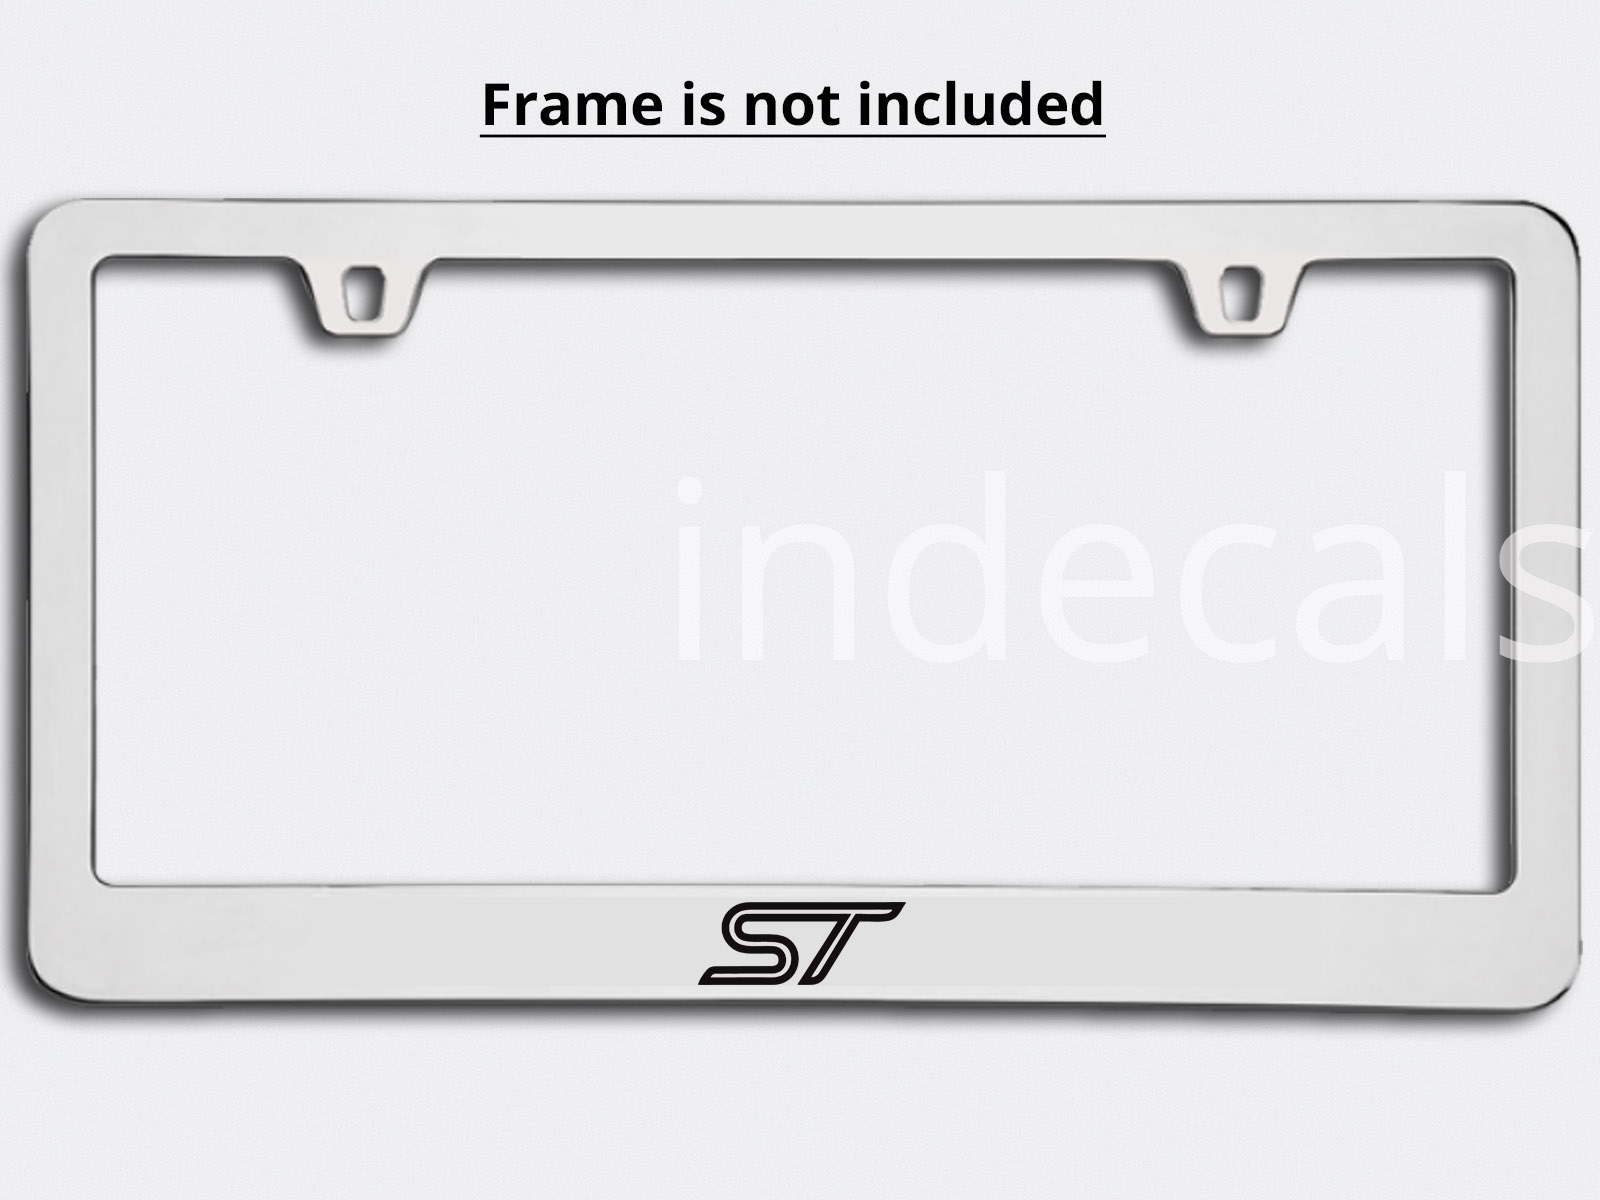 3 x Ford ST Stickers for License Plate Frame - Black